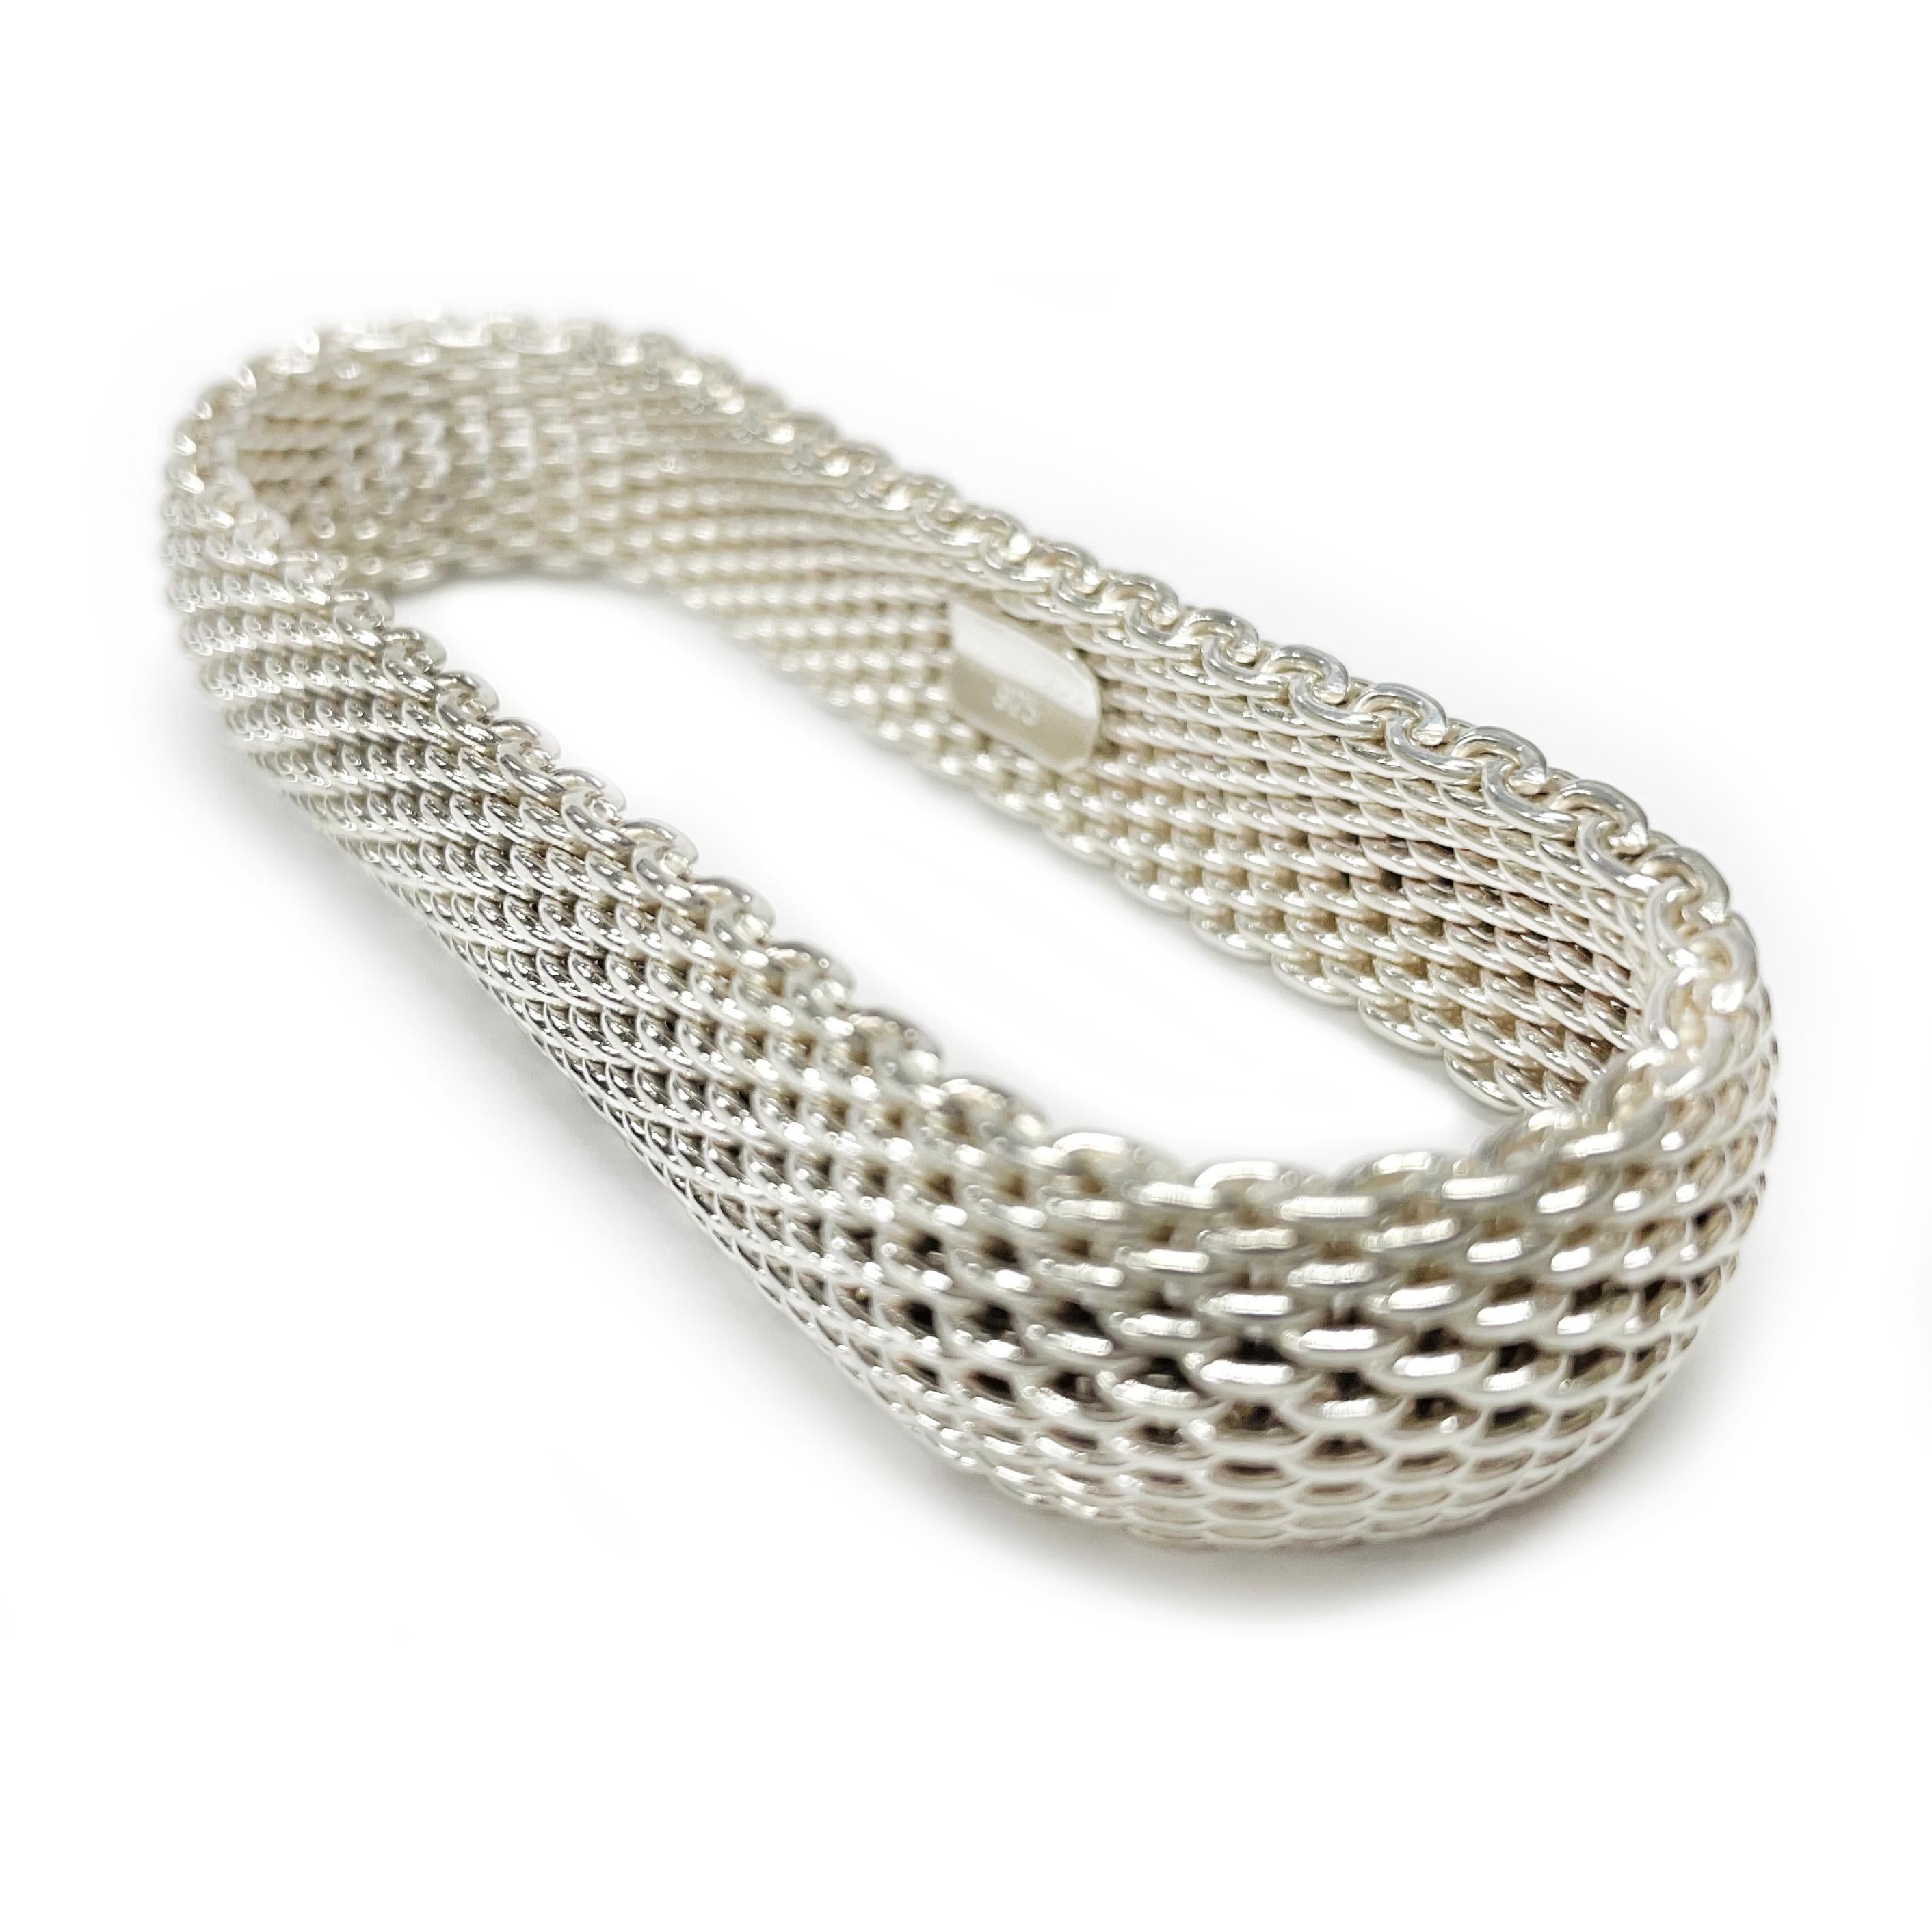 Tiffany & Co. 925 Silver Somerset Mesh Bracelet. A magnificent 15mm wide mesh bracelet that slips over the wrist. The continuous bold and intricate mesh design is a statement of beauty and refinement. Stamped on the inside clasp is Tiffany & Co.